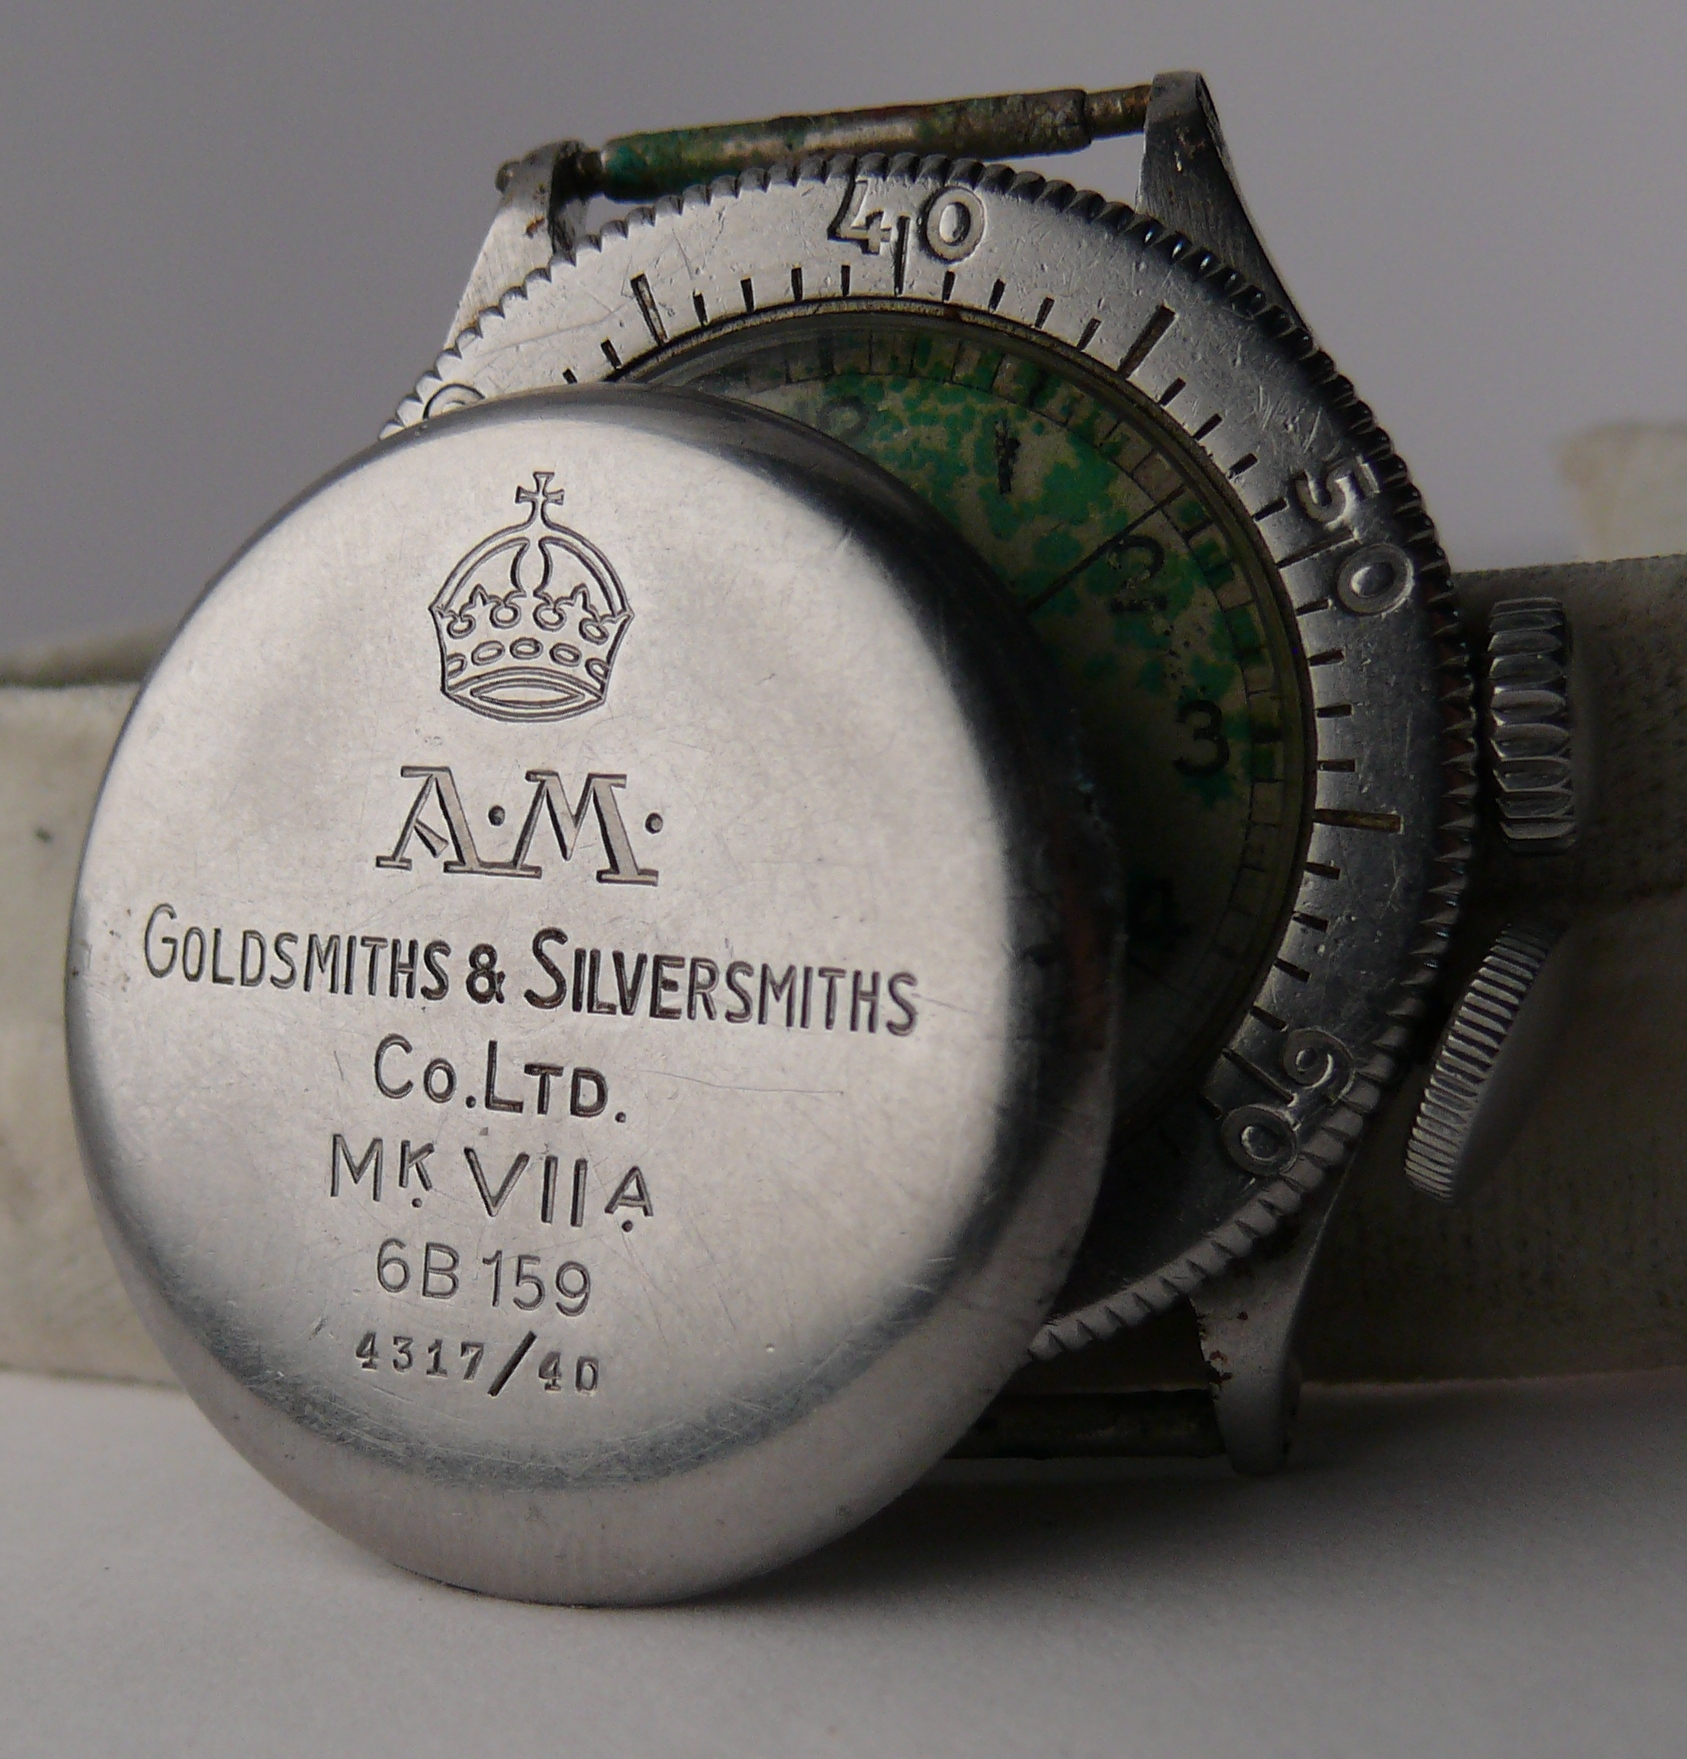 1940 WW2 Vintage Gents Omega RAF Weems Wristwatch Ref 6B 159. A very rare and collectable model, - Image 7 of 15